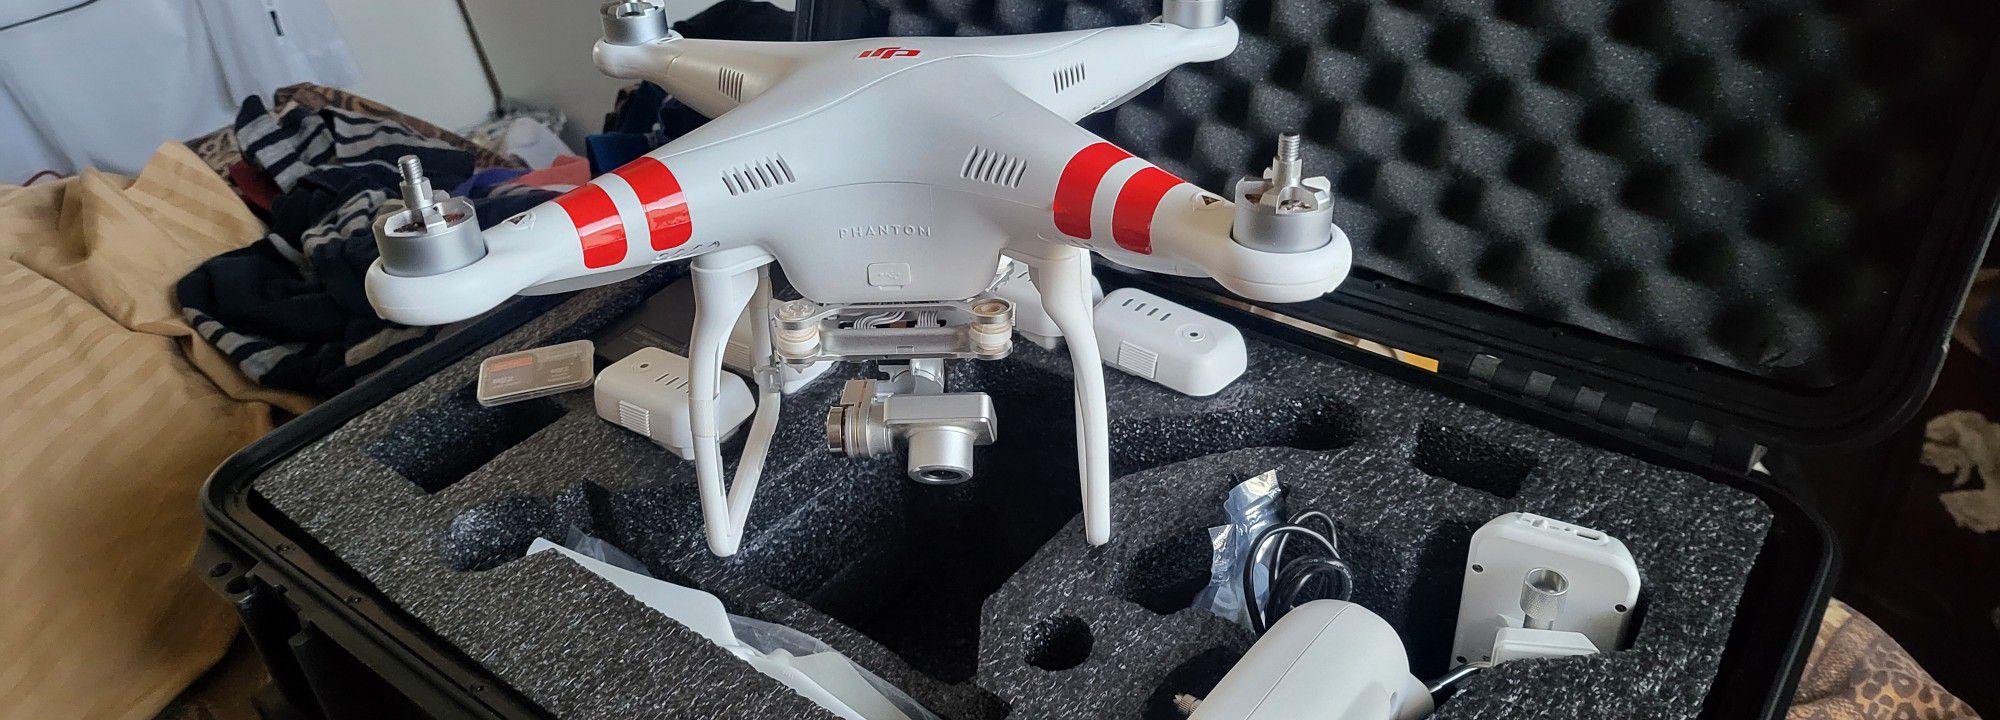 $260. Dji W/CAMERA.and Tablet..come W 3 Battery